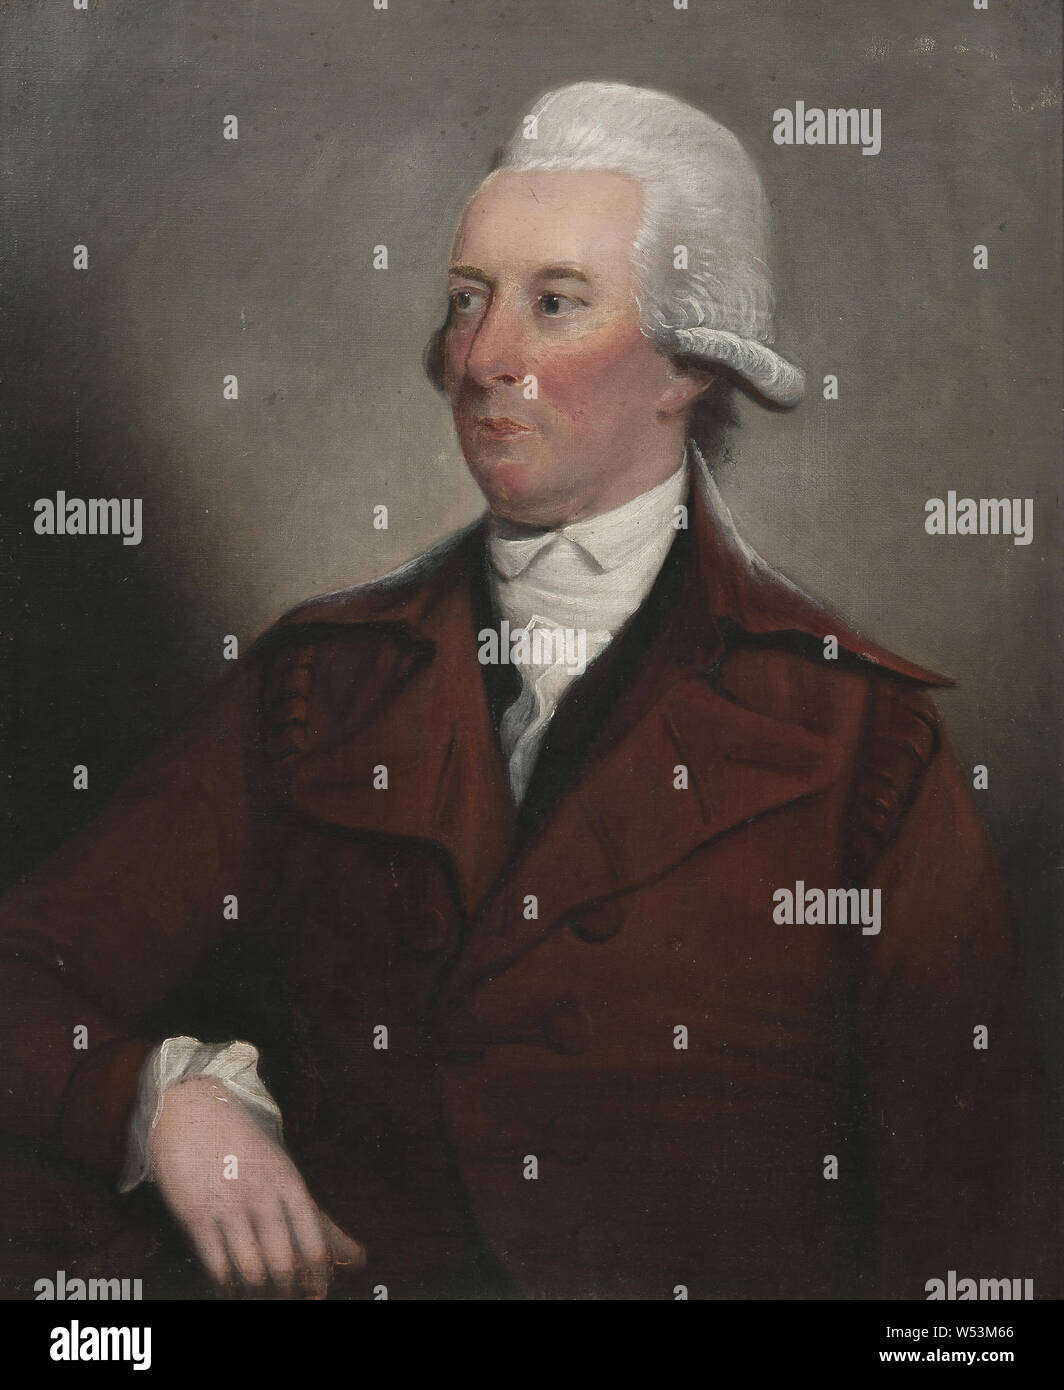 Manner of Henry Raeburn, (1756-1823), Alexander Baron Seton (1738-1814), lawyer, landowner, born in Scotland, working in Sweden and Scotland, g.m. 1. Elizabeth Angus, 2. Anne Innes of Cathlow, nephew of and adopted by George Seton, owned Ekolsund 1786-1828, Oil on canvas, Height: 78 cm (30.7), Width: 64 cm (25.1) Stock Photo